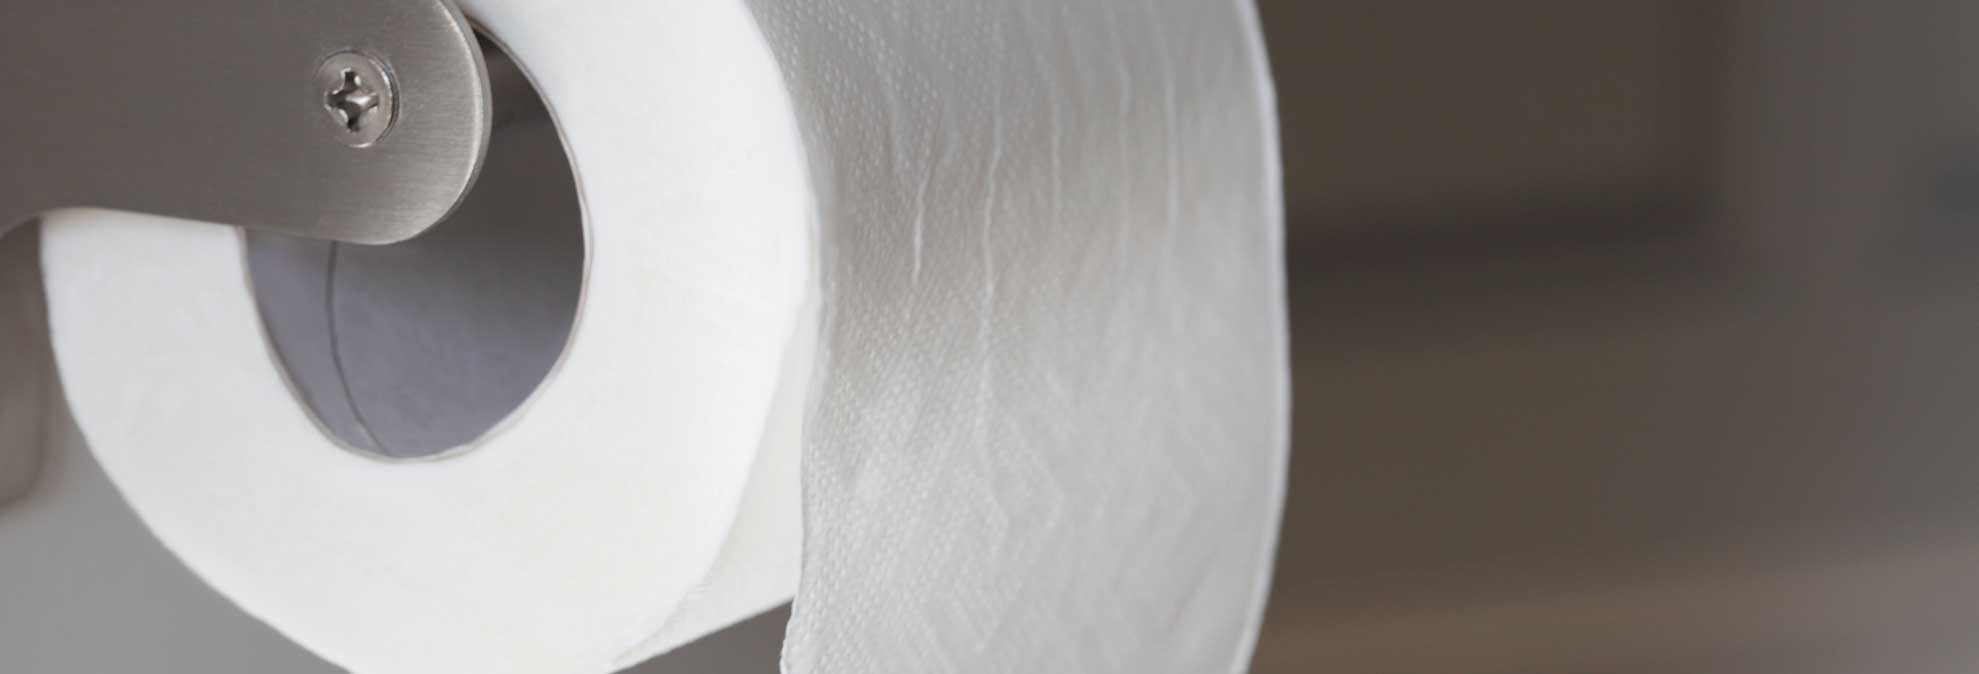 Best Toilet Paper Buying Guide Consumer Reports